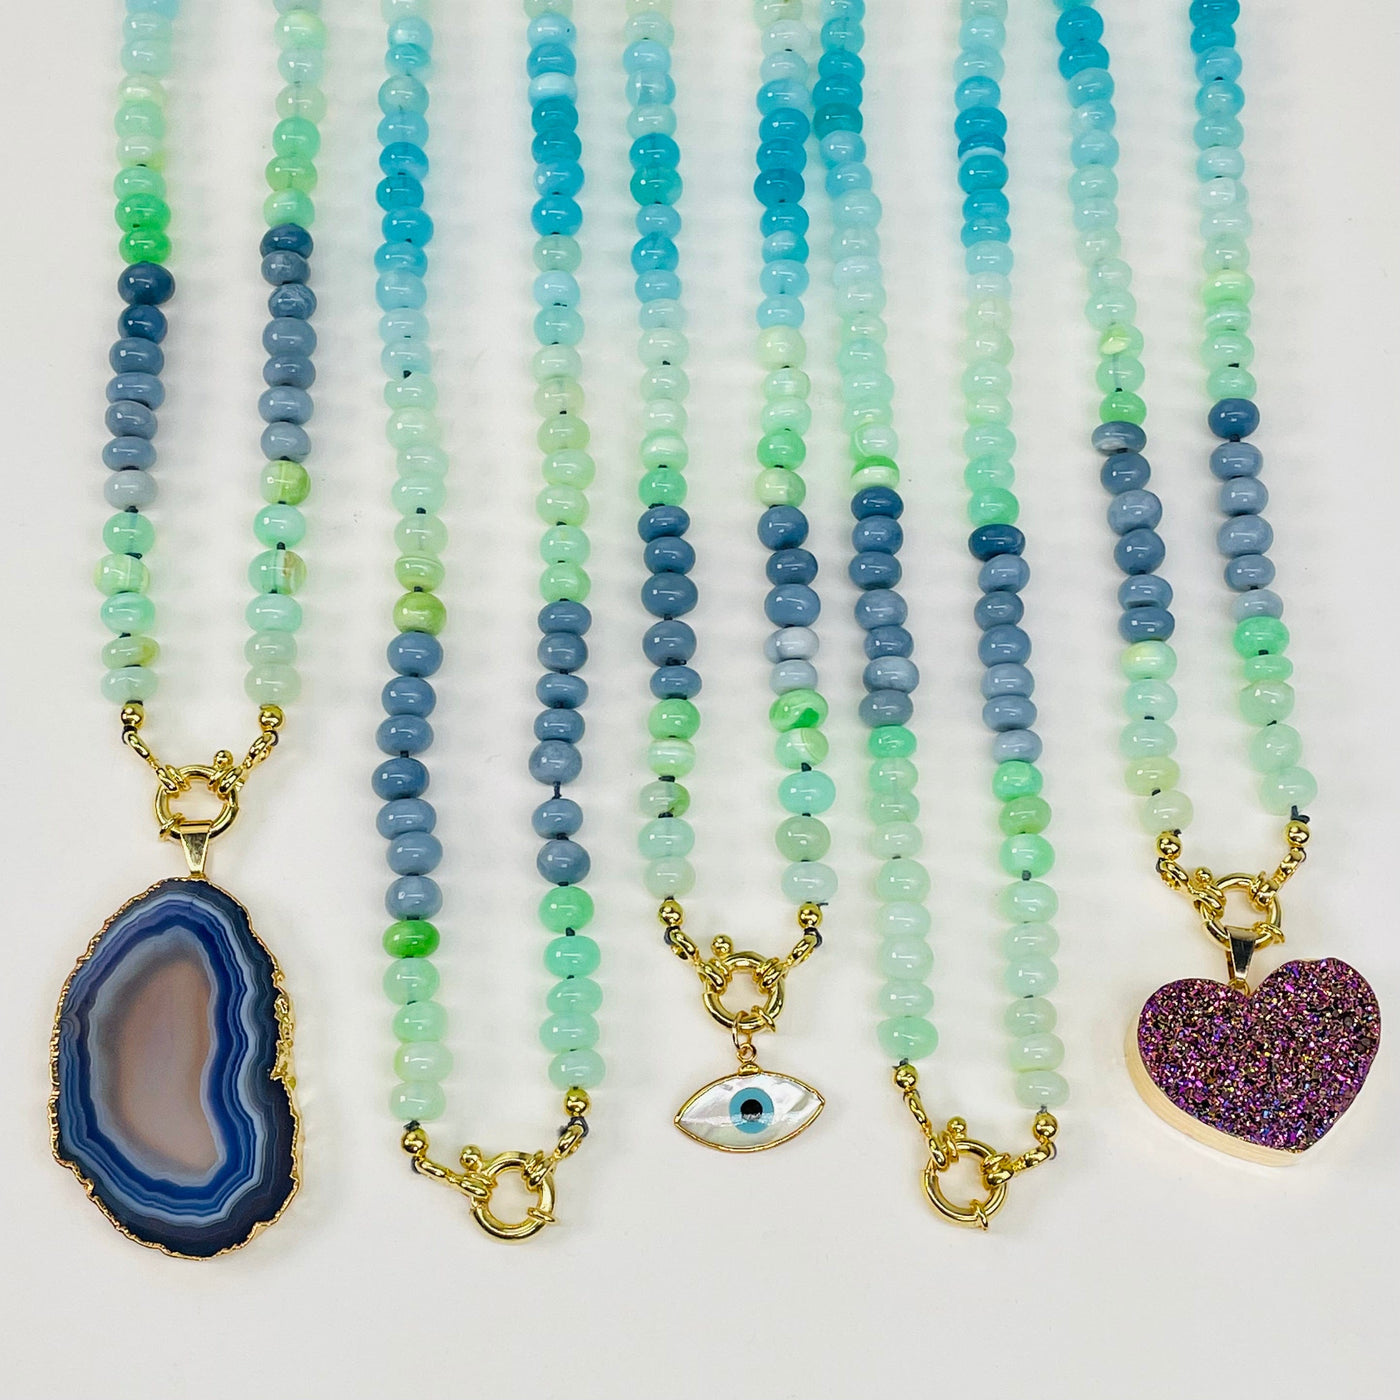 multiple necklaces displayed. some with candy charms attached 